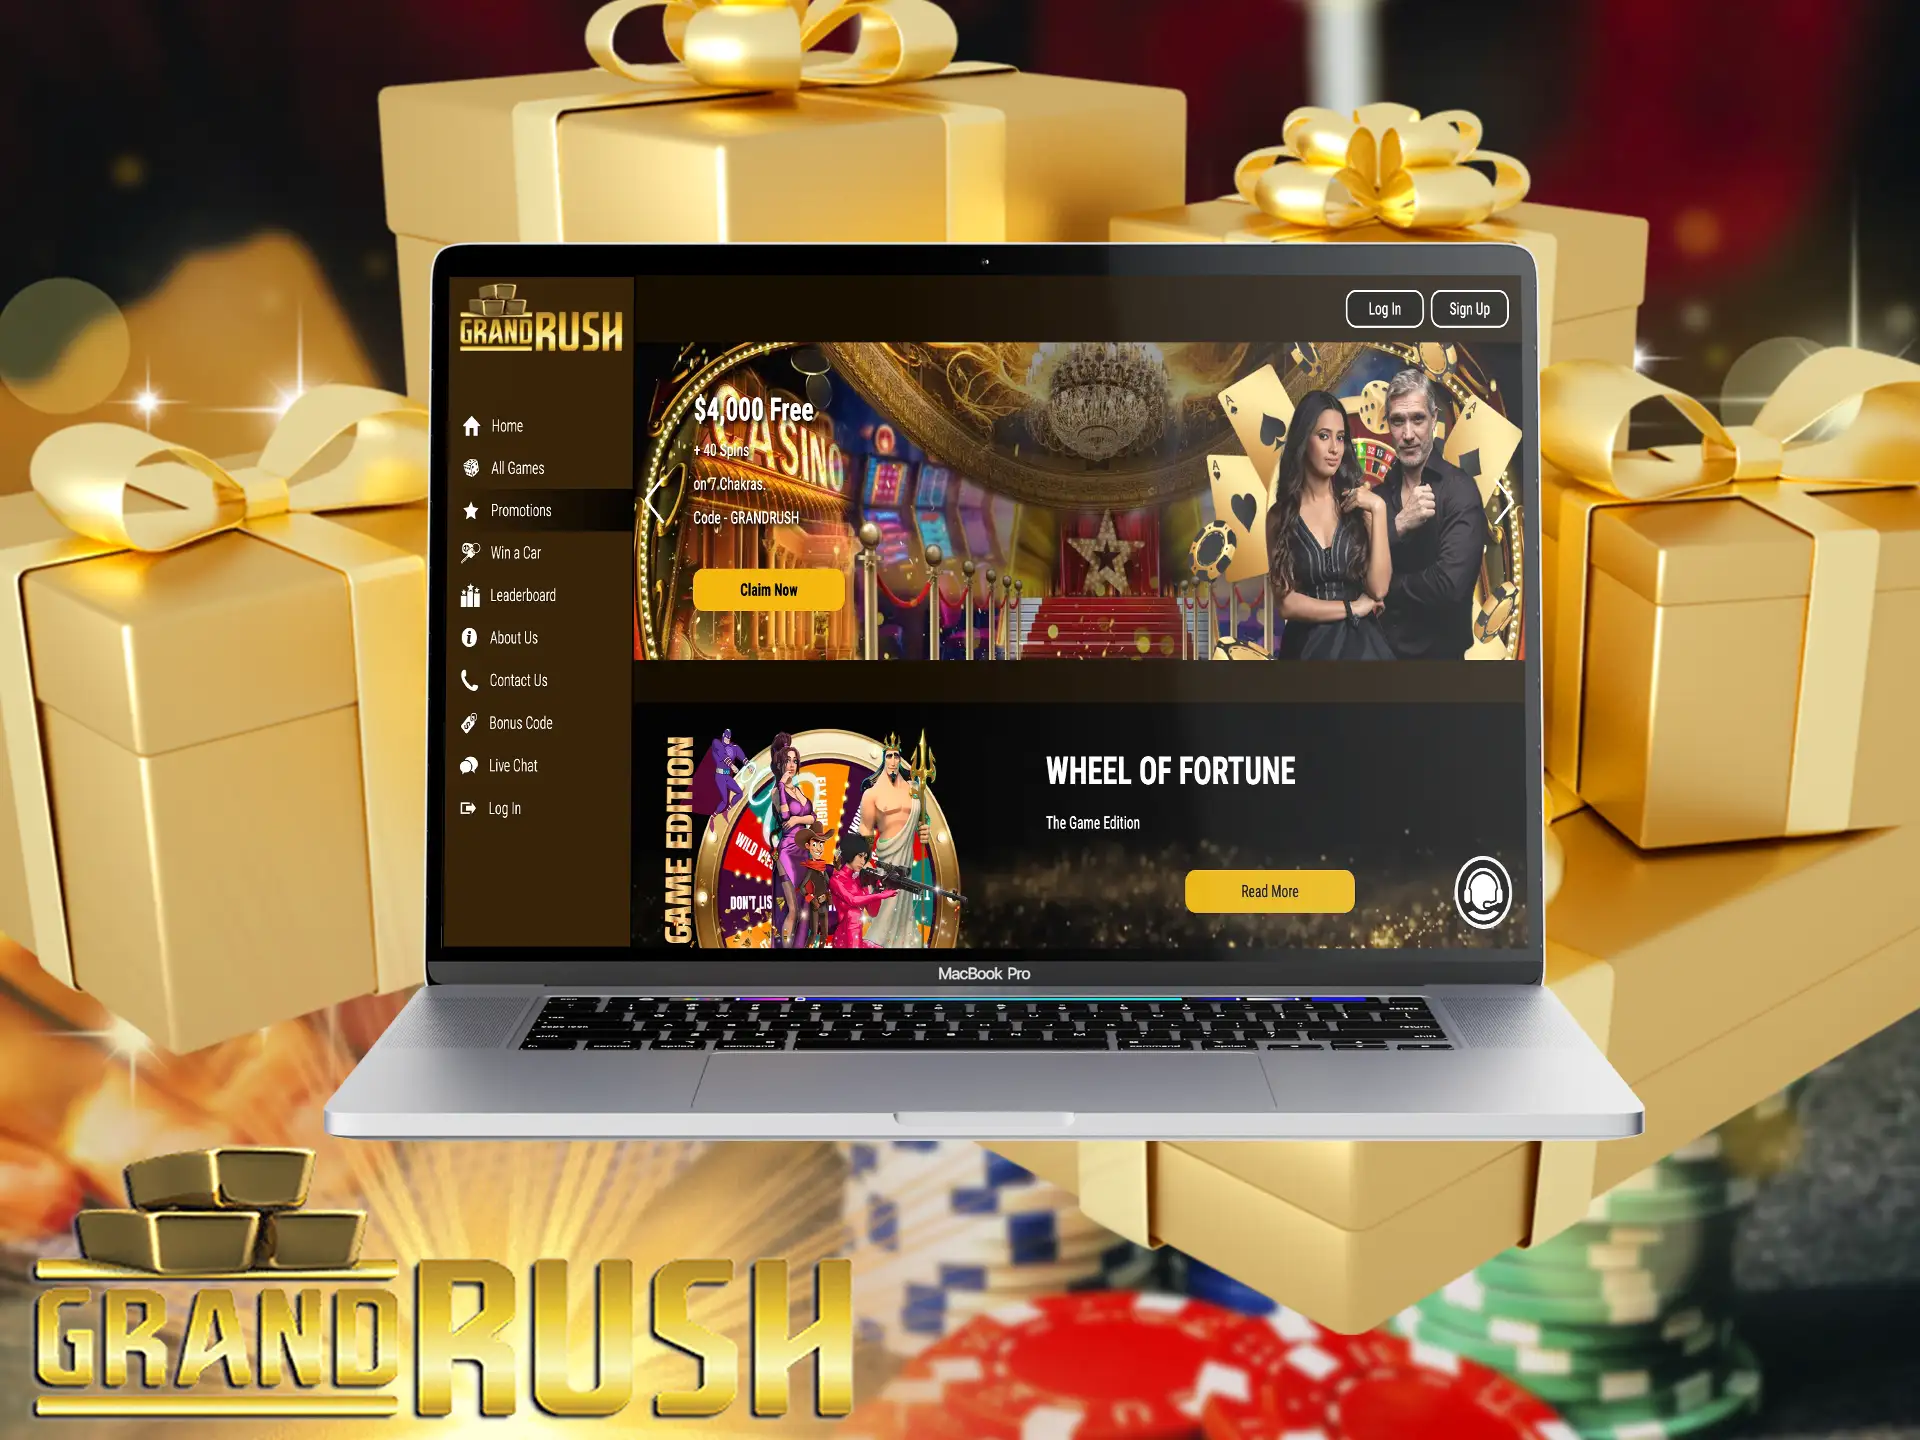 There are lots of Grand Rush promo codes and bonuses for Australian players.